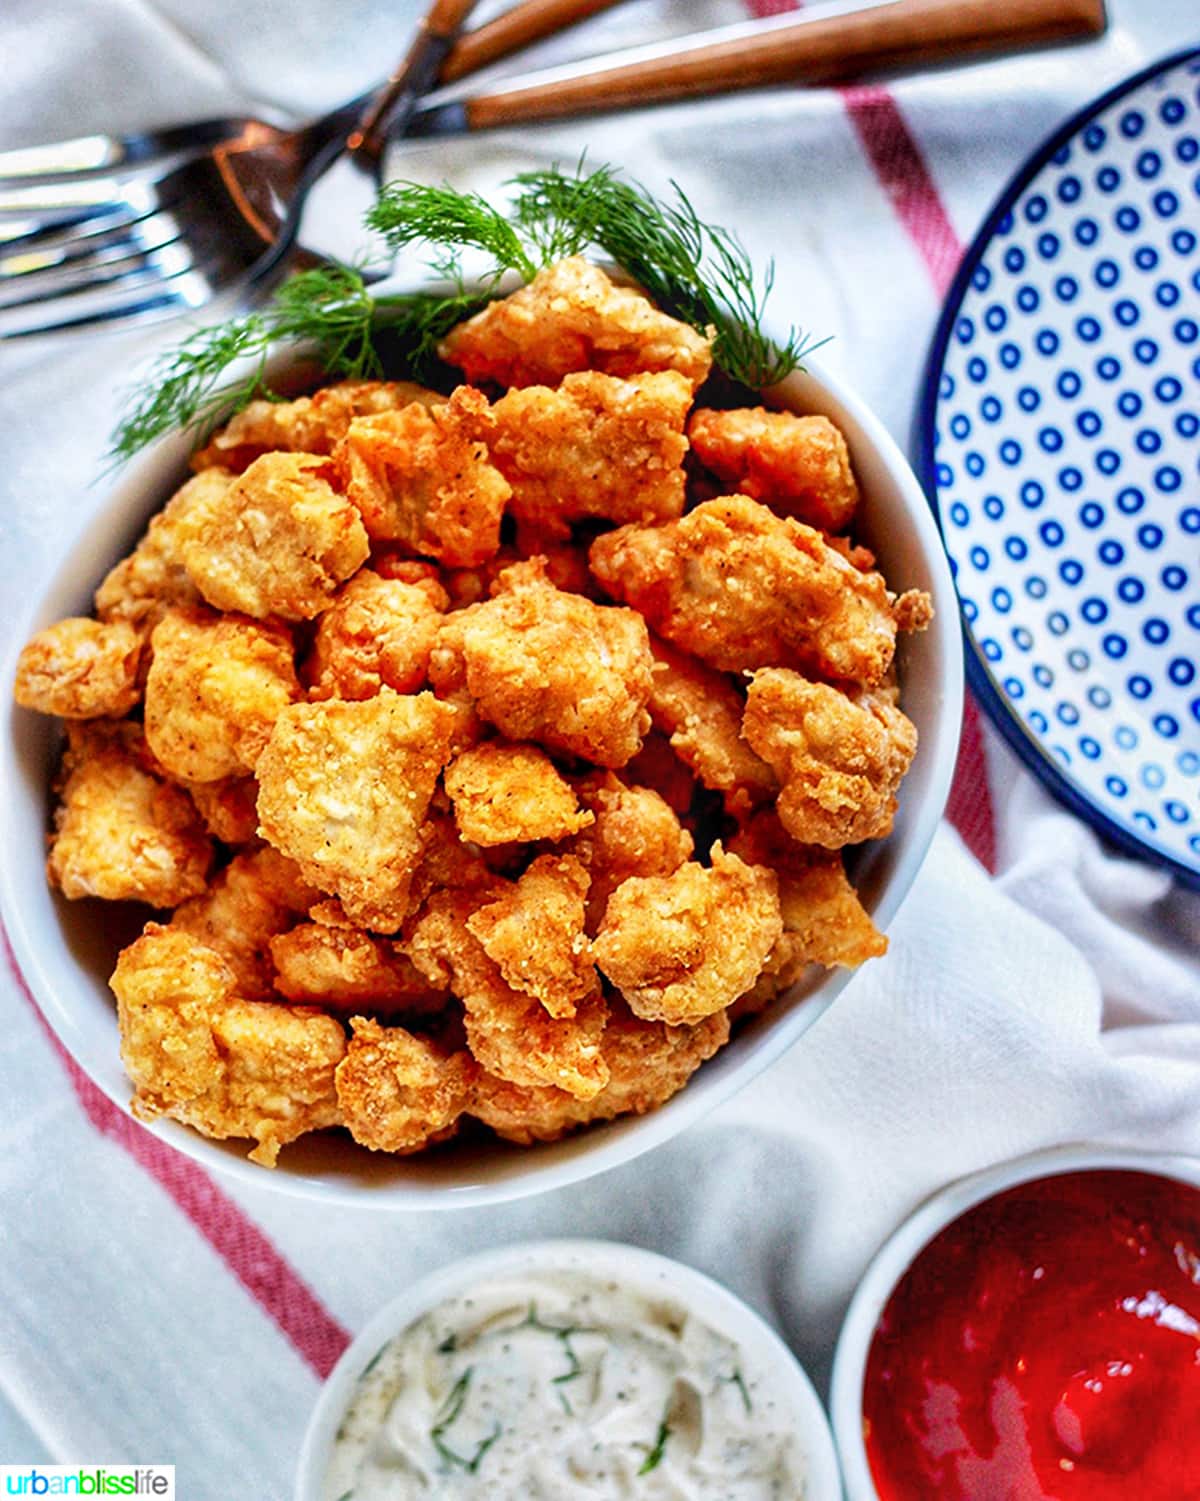 bowl full of crispy Air Fryer Popcorn Chicken with dipping sauces, a white and red striped napkin, forks and extra plates.